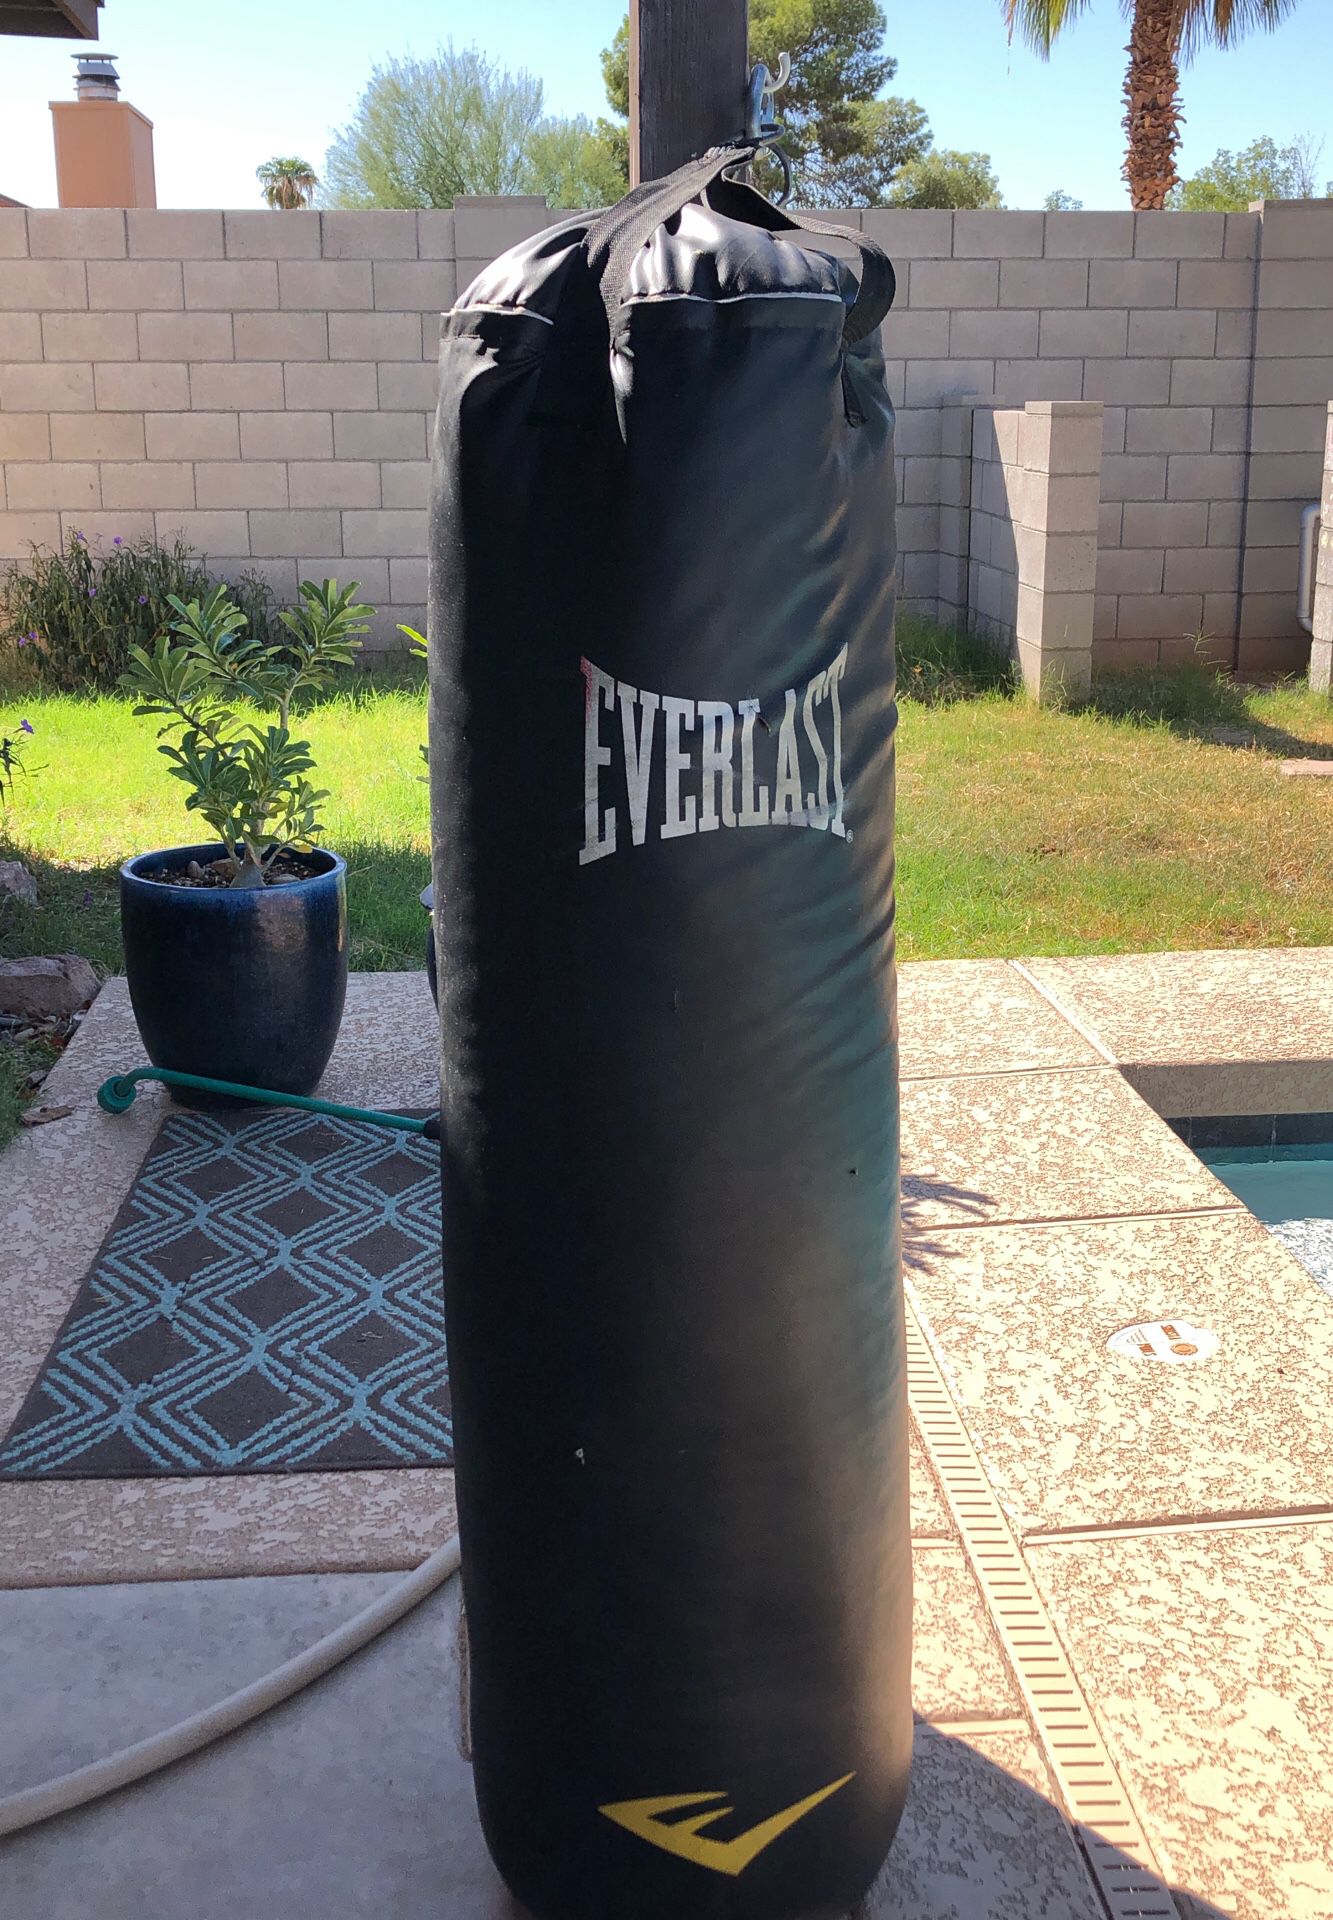 Everlast workout bag and stand